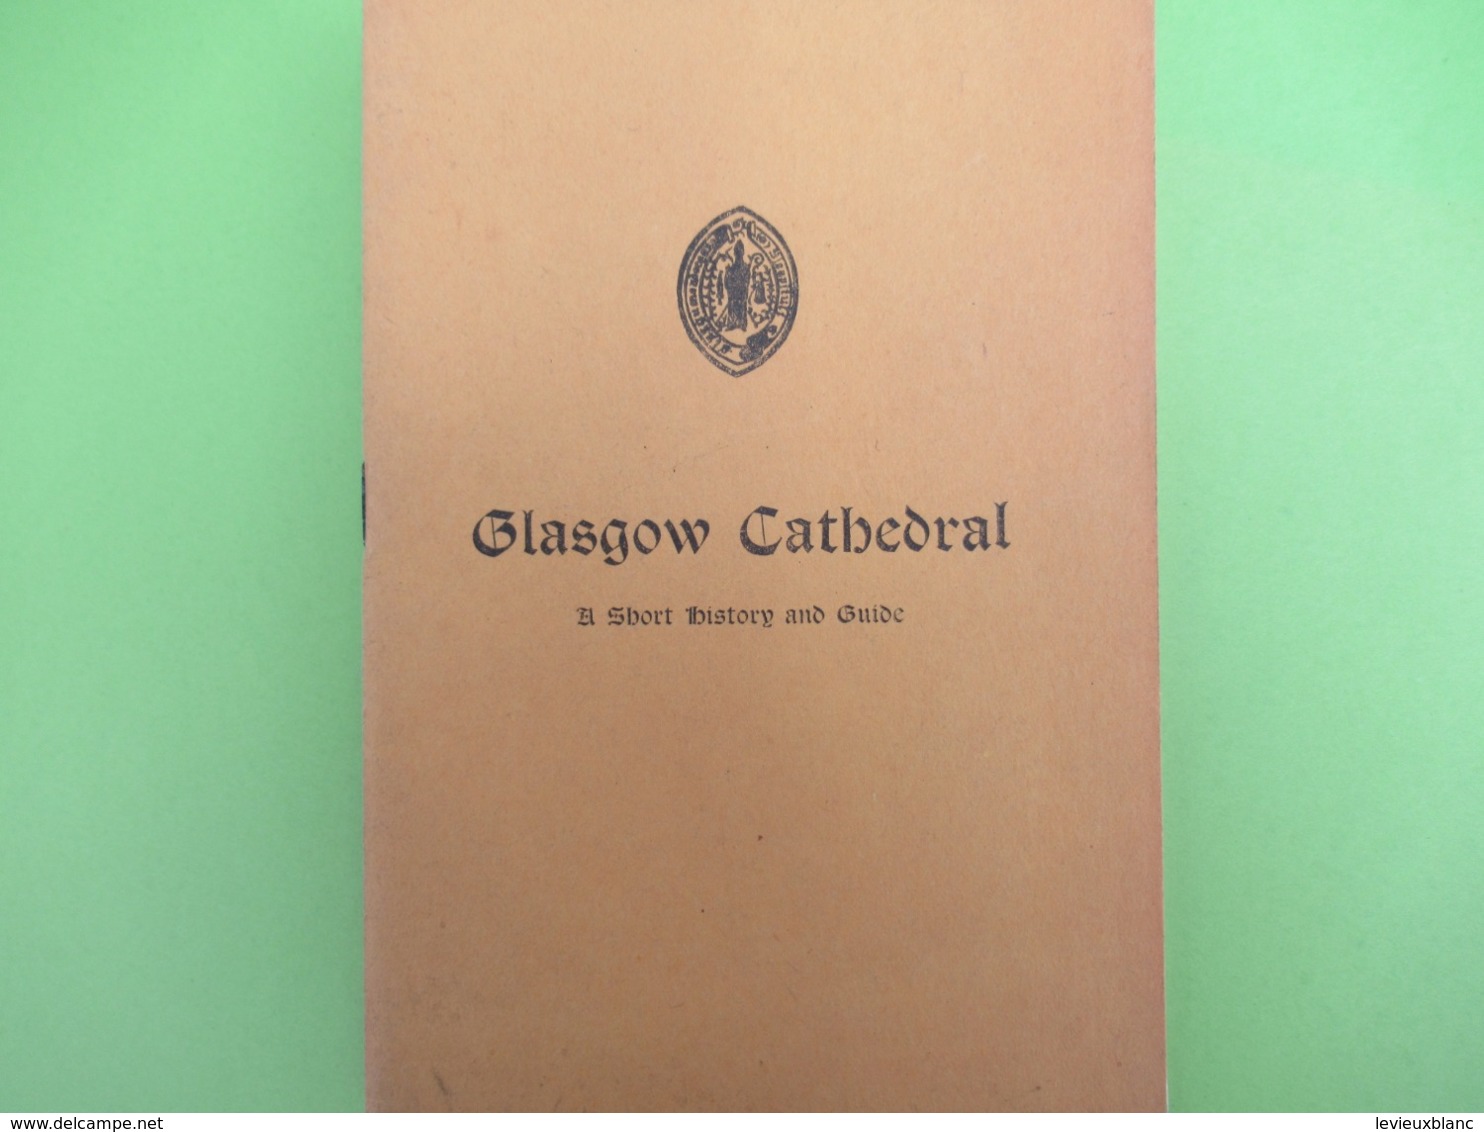 Guide Historique/A Short History And Guide/GLASGOW CATHEDRAL/A Nevile Davidson/Minister Of Glasgow/1938          PGC383 - Architecture